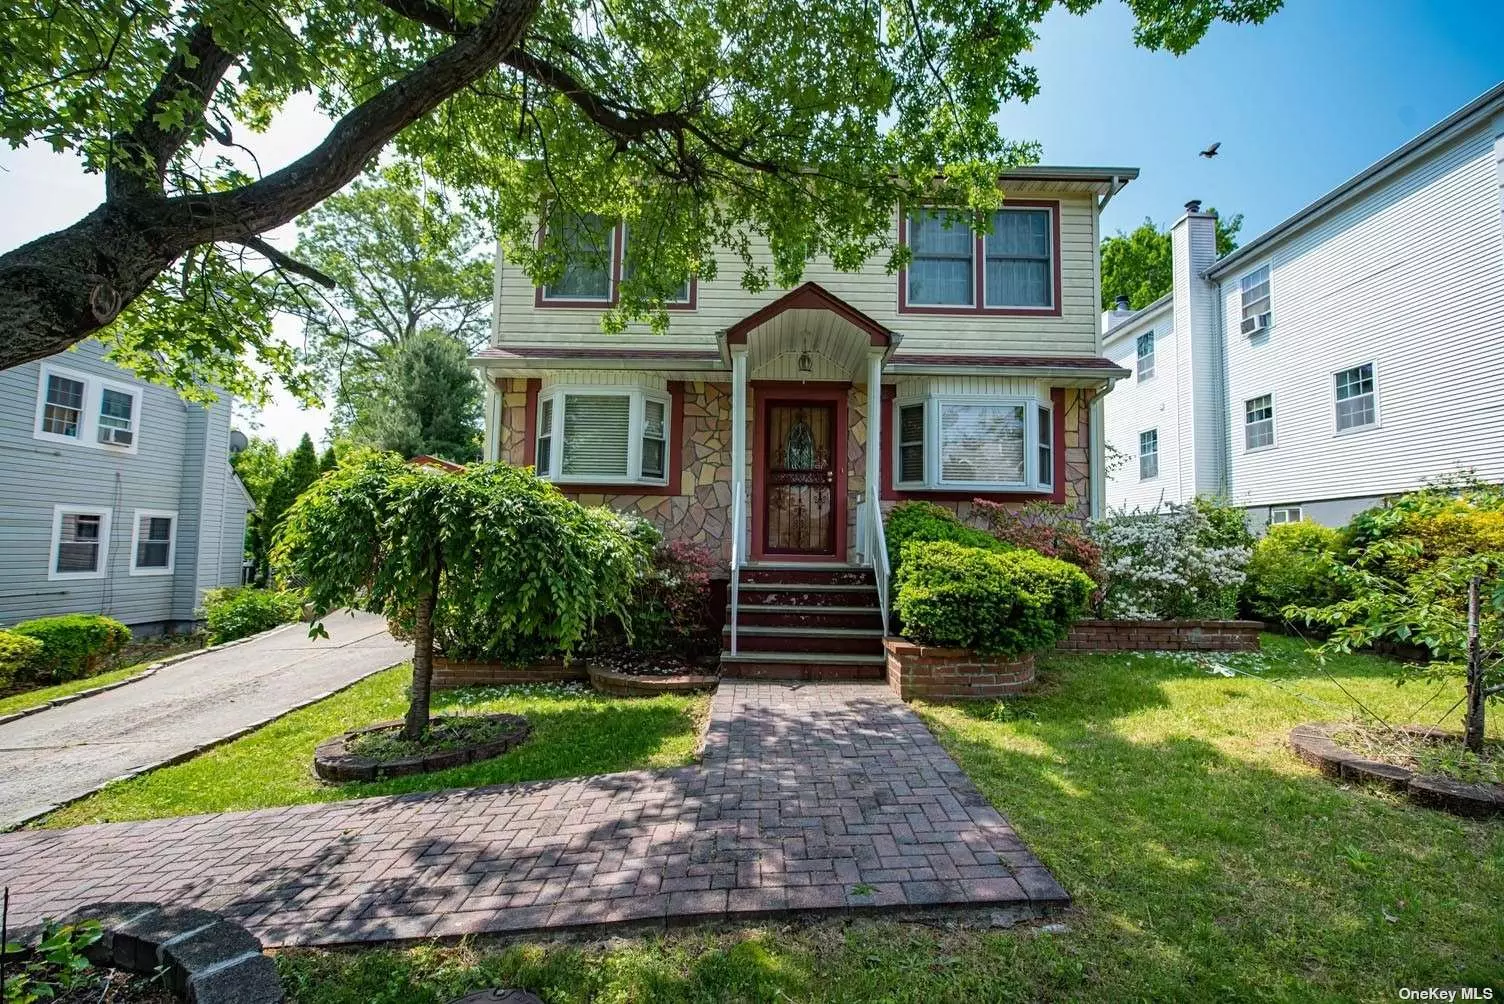 Lovely Colonial in the Manhasset School Districts. Large Bedrooms. Walk-In Closets, CAC, Sunroom, Eat-in Kitchen, Bar, Finished Basement. Low Taxes. Close to Public Transportation and Shops. A Must See!! Please Present All Offers!